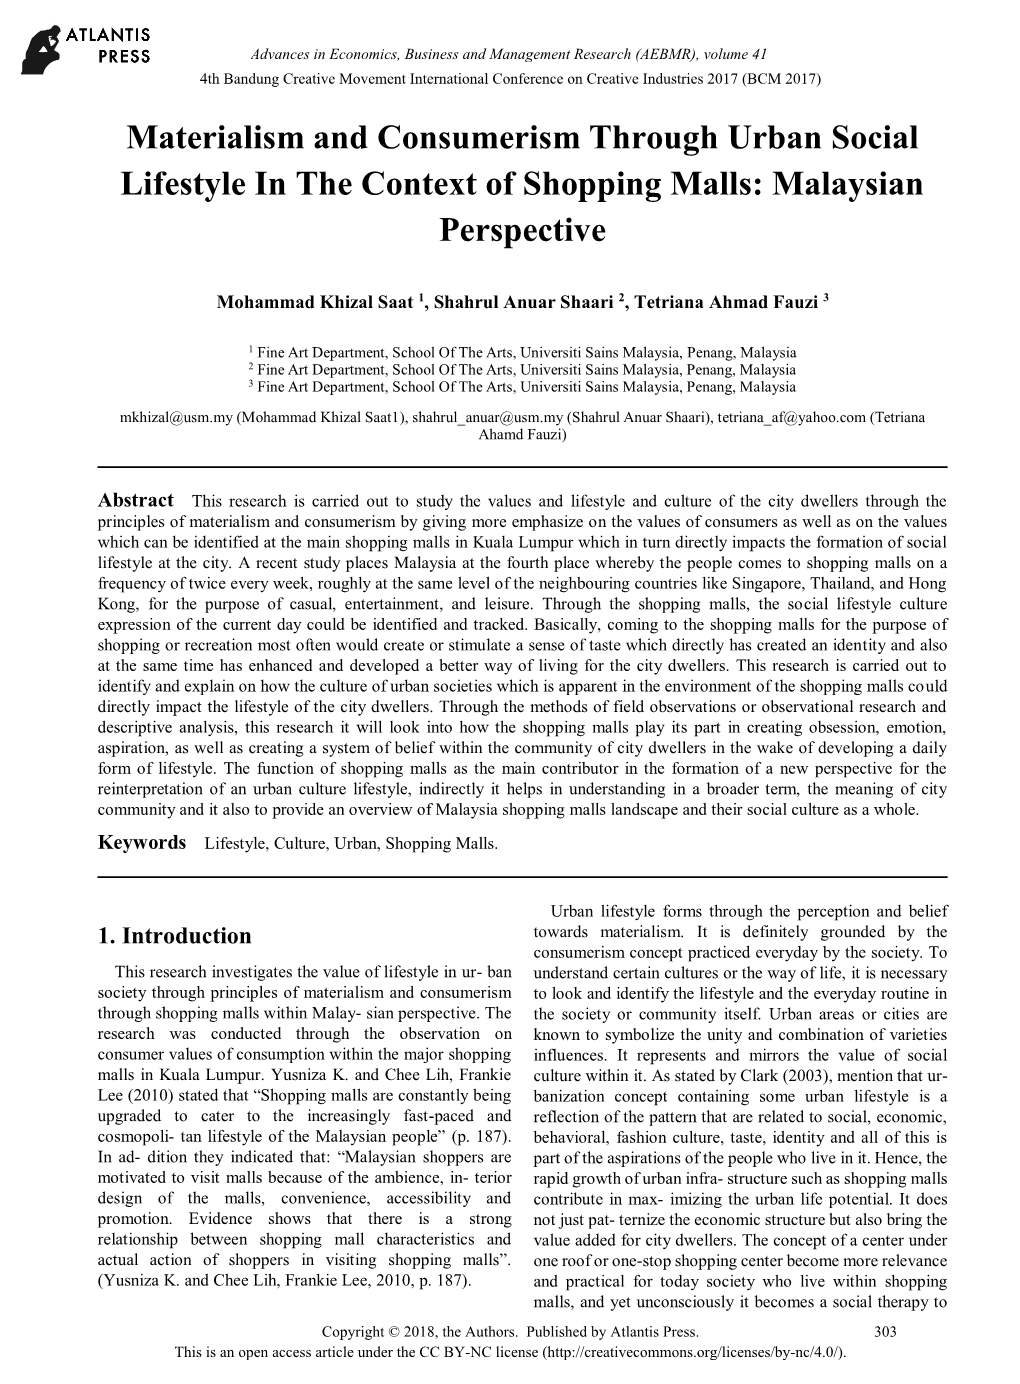 Materialism and Consumerism Through Urban Social Lifestyle in the Context of Shopping Malls: Malaysian Perspective